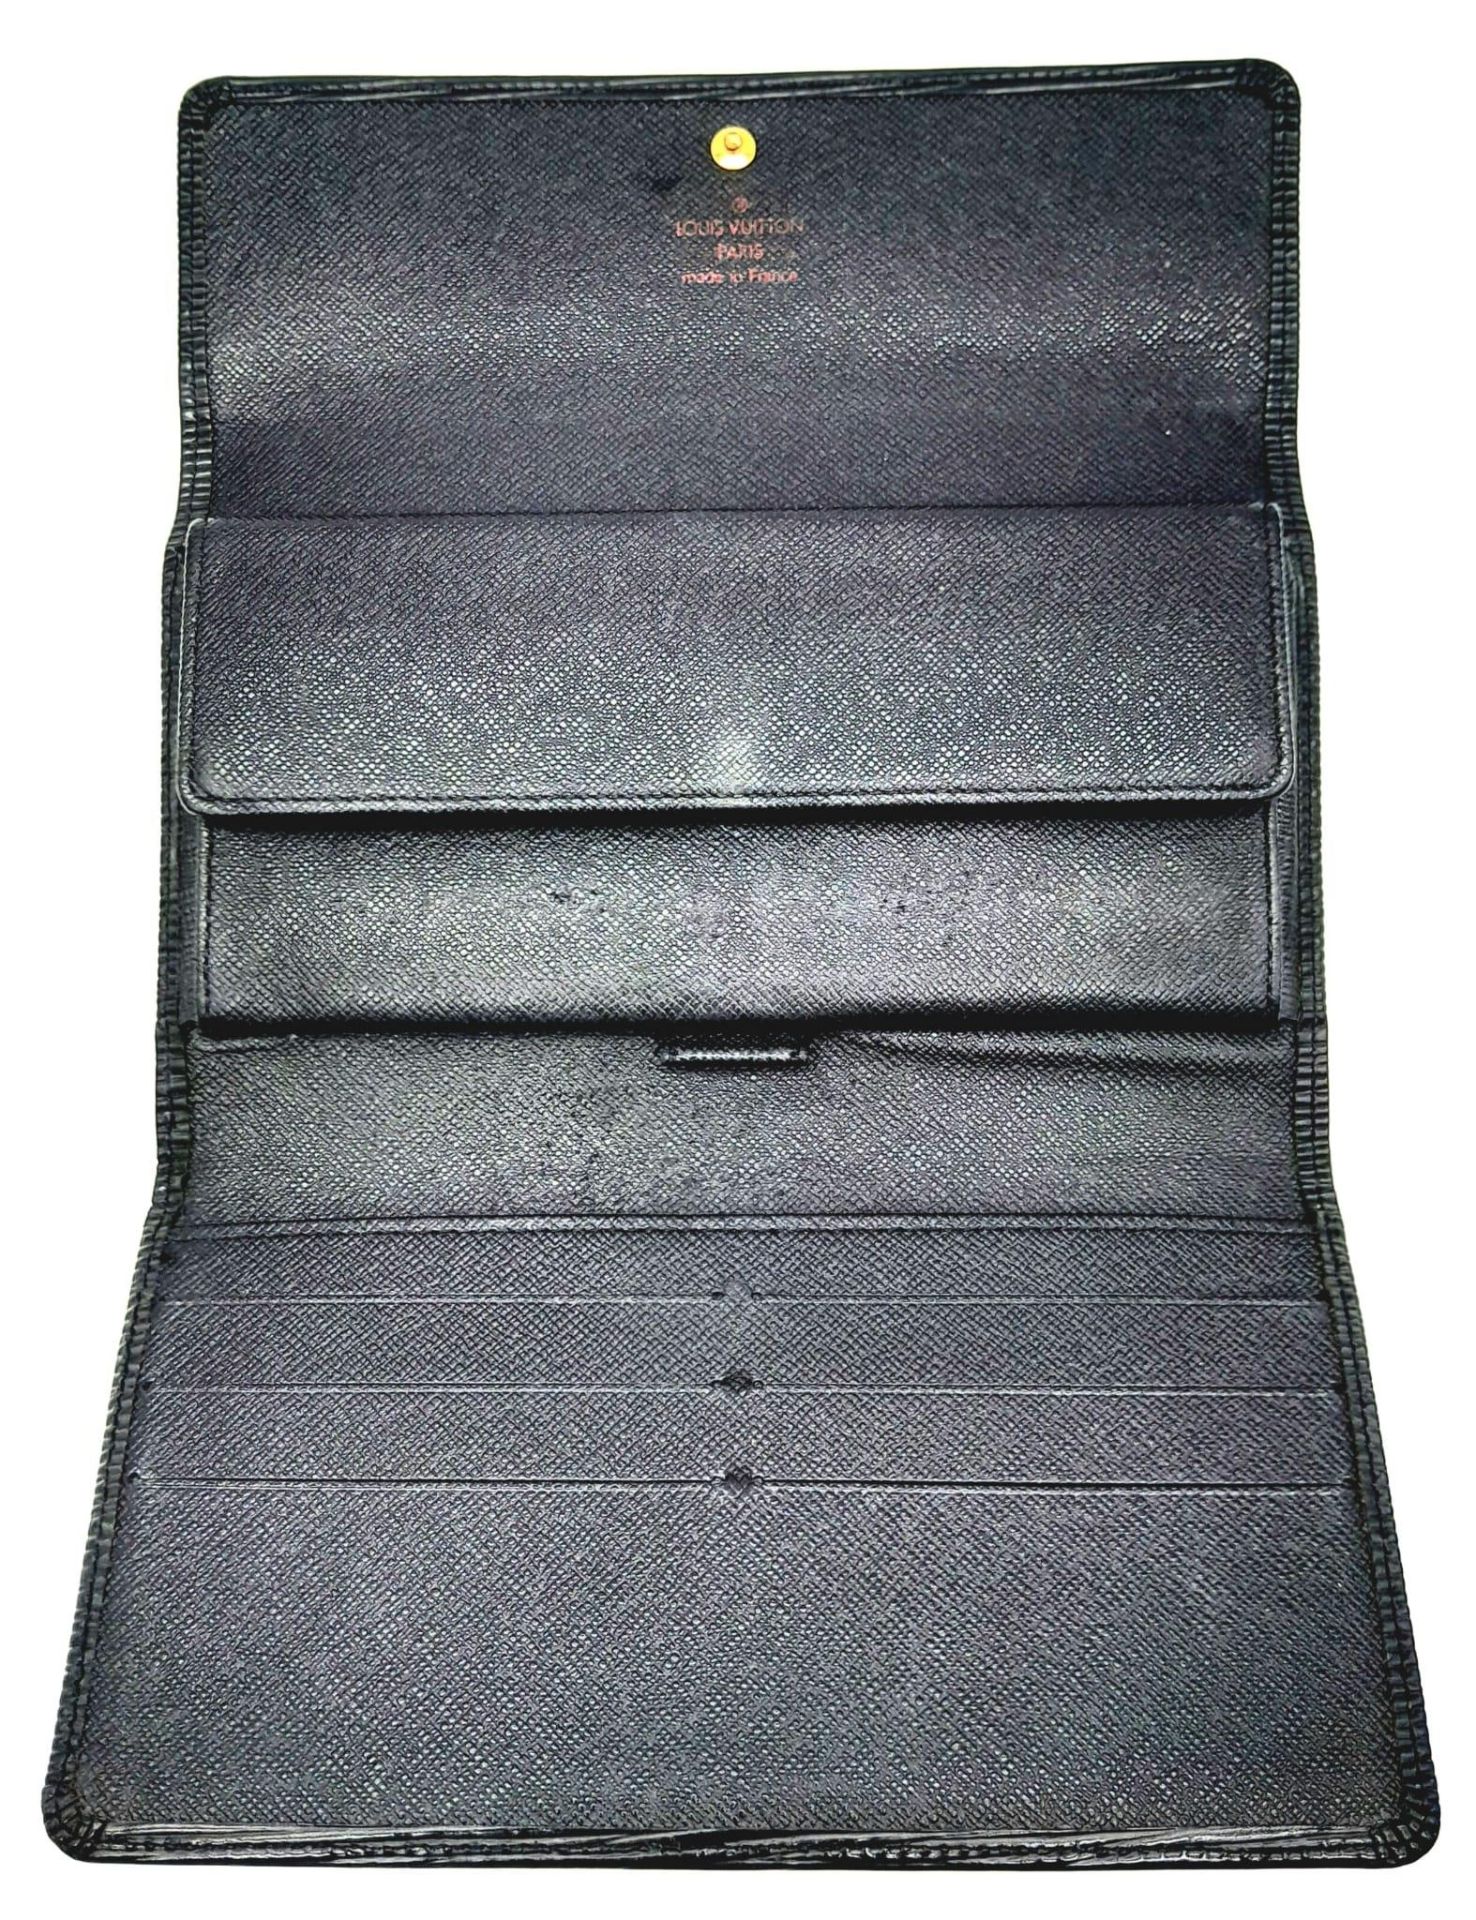 A Louis Vuitton Black 'Sarah' Wallet. Epi leather exterior with the LV logo and press stud - Image 4 of 8